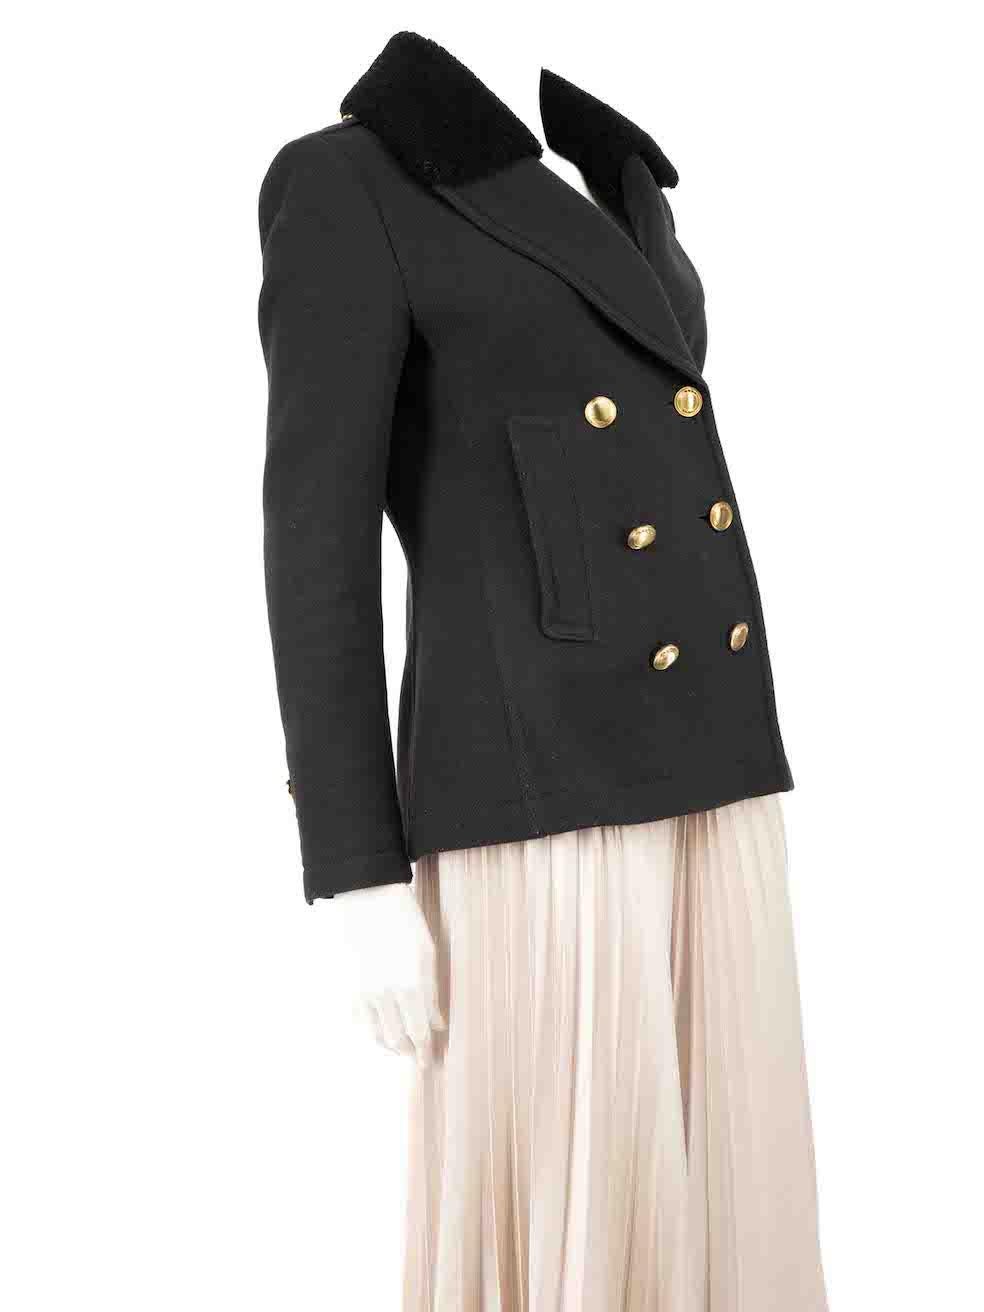 CONDITION is Very good. Minimal wear to coat is evident. Minimal pilling to overall material especially around the cuffs and underarms on this used Burberry Brit designer resale item.
 
 
 
 Details
 
 
 Navy
 
 Wool
 
 Coat
 
 Double breasted
 
